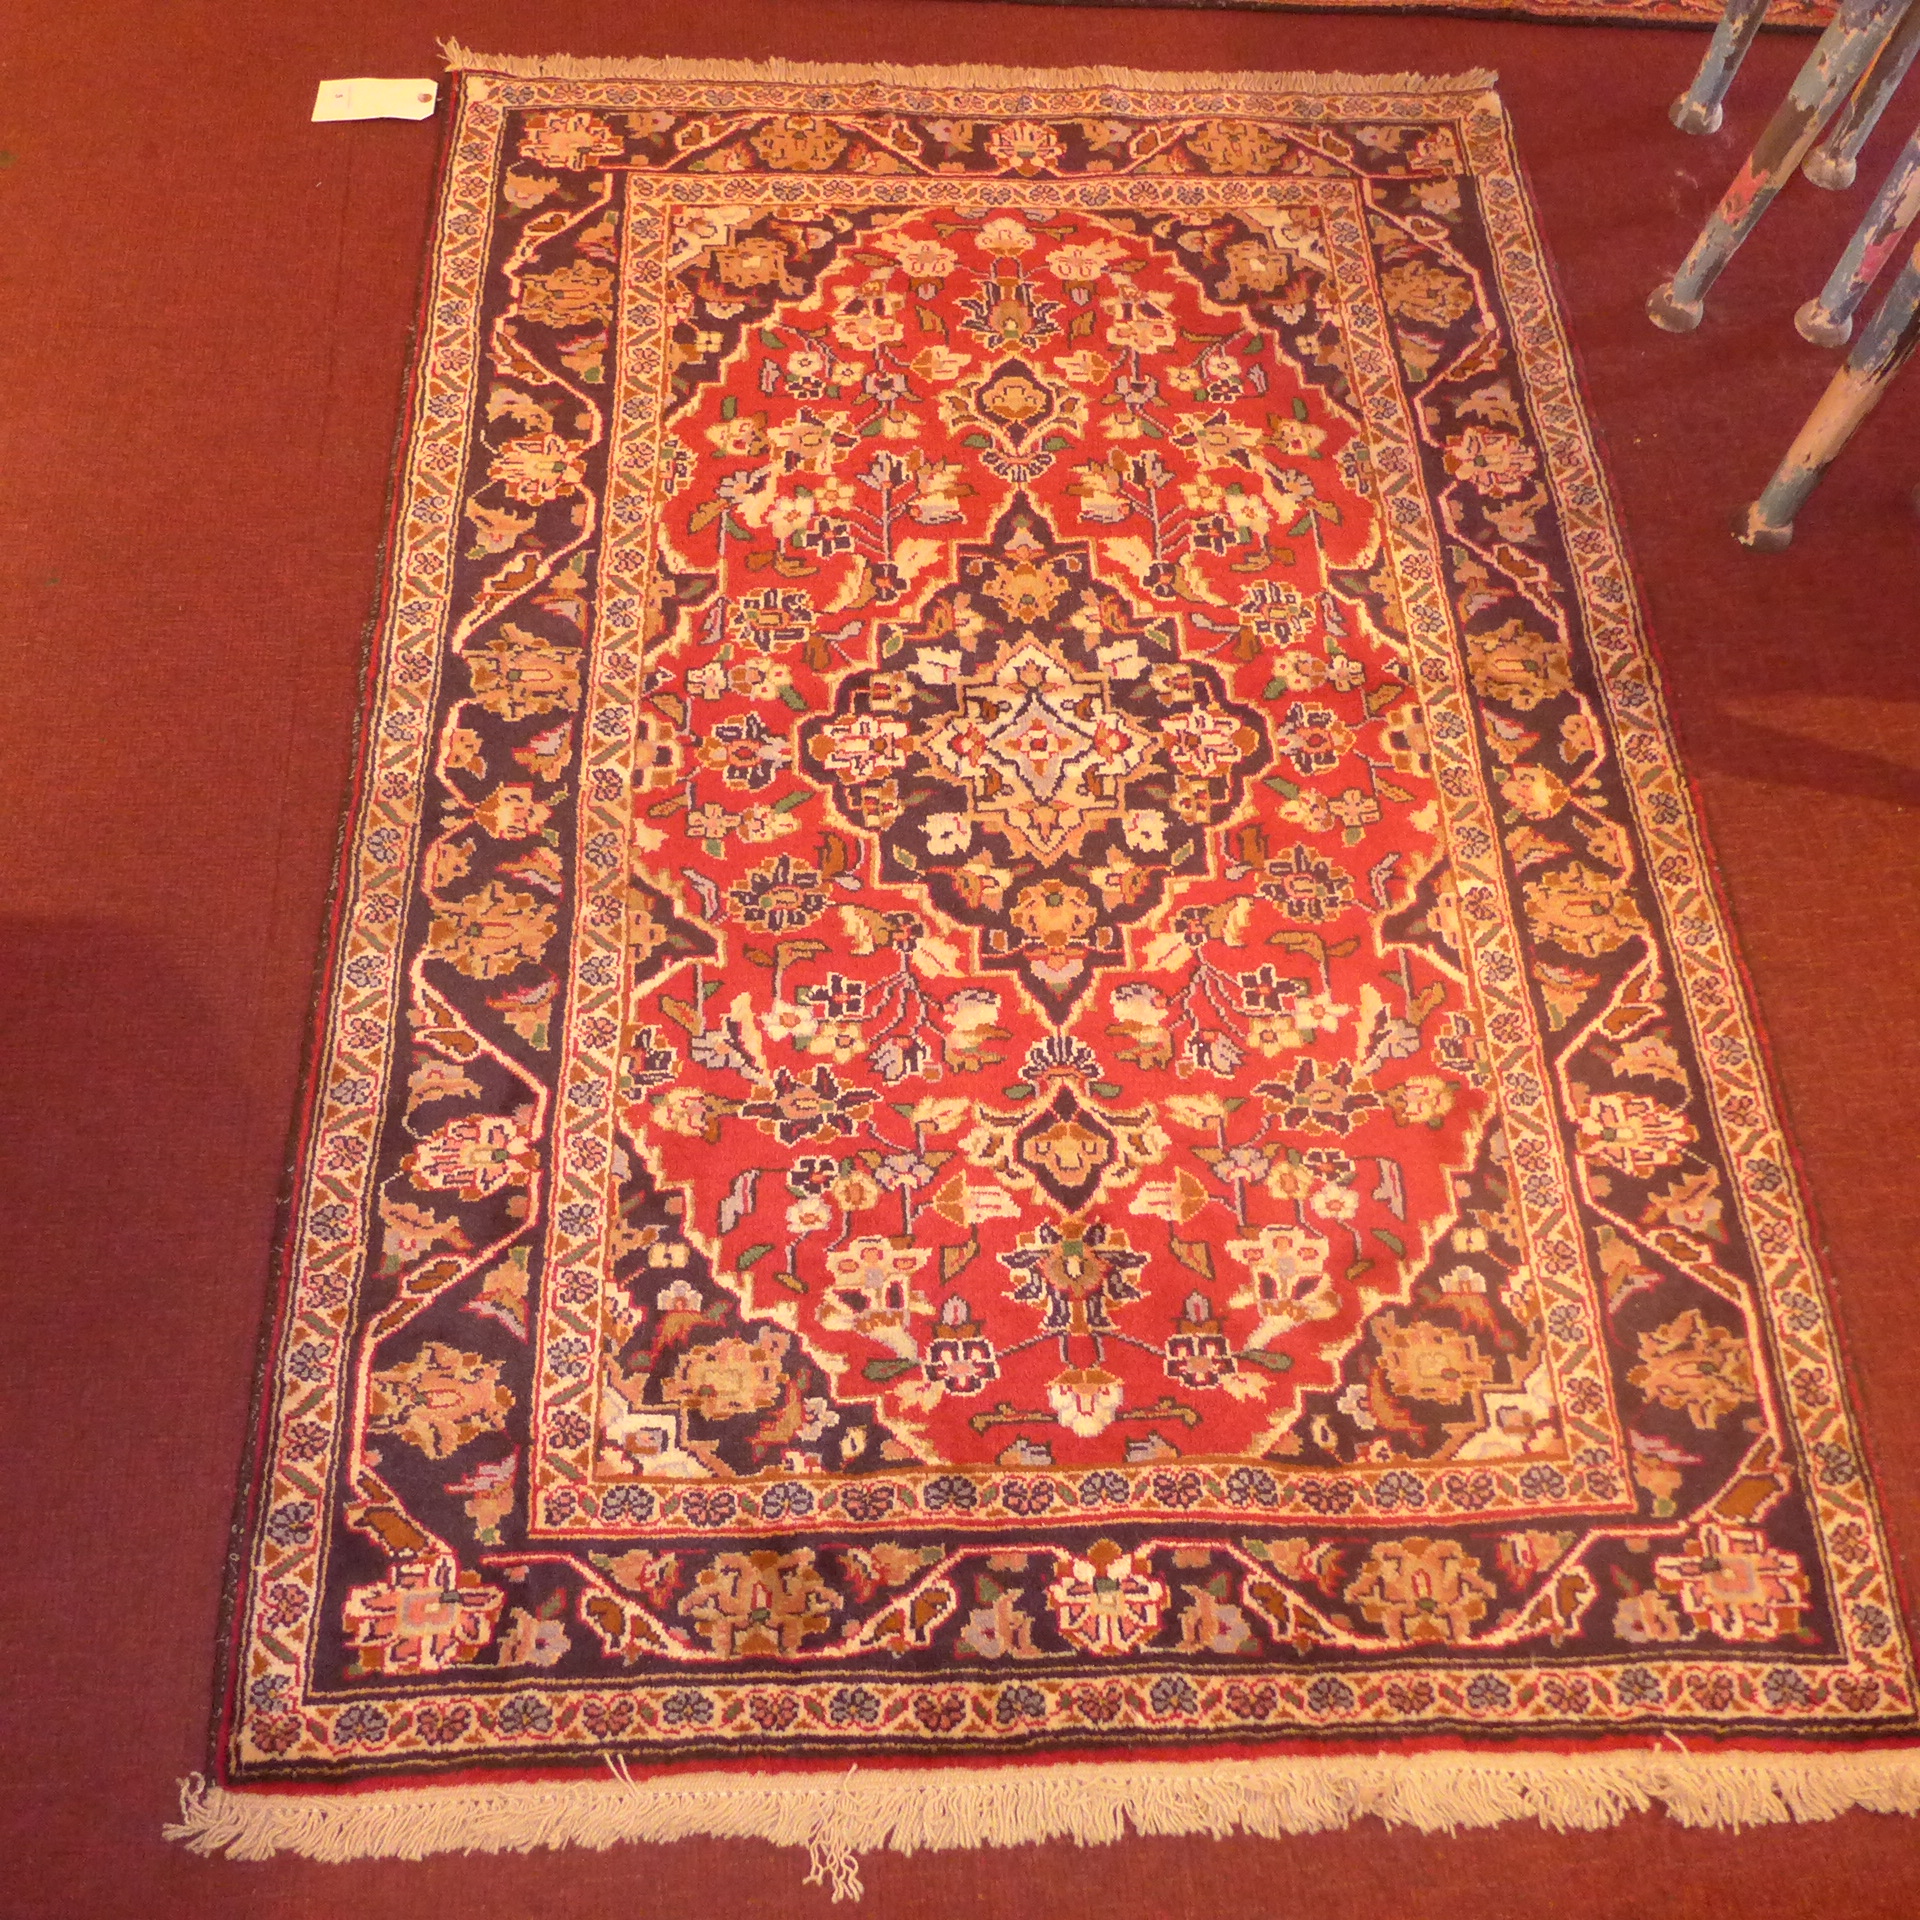 Two identical fine Persian Kashan rugs 1